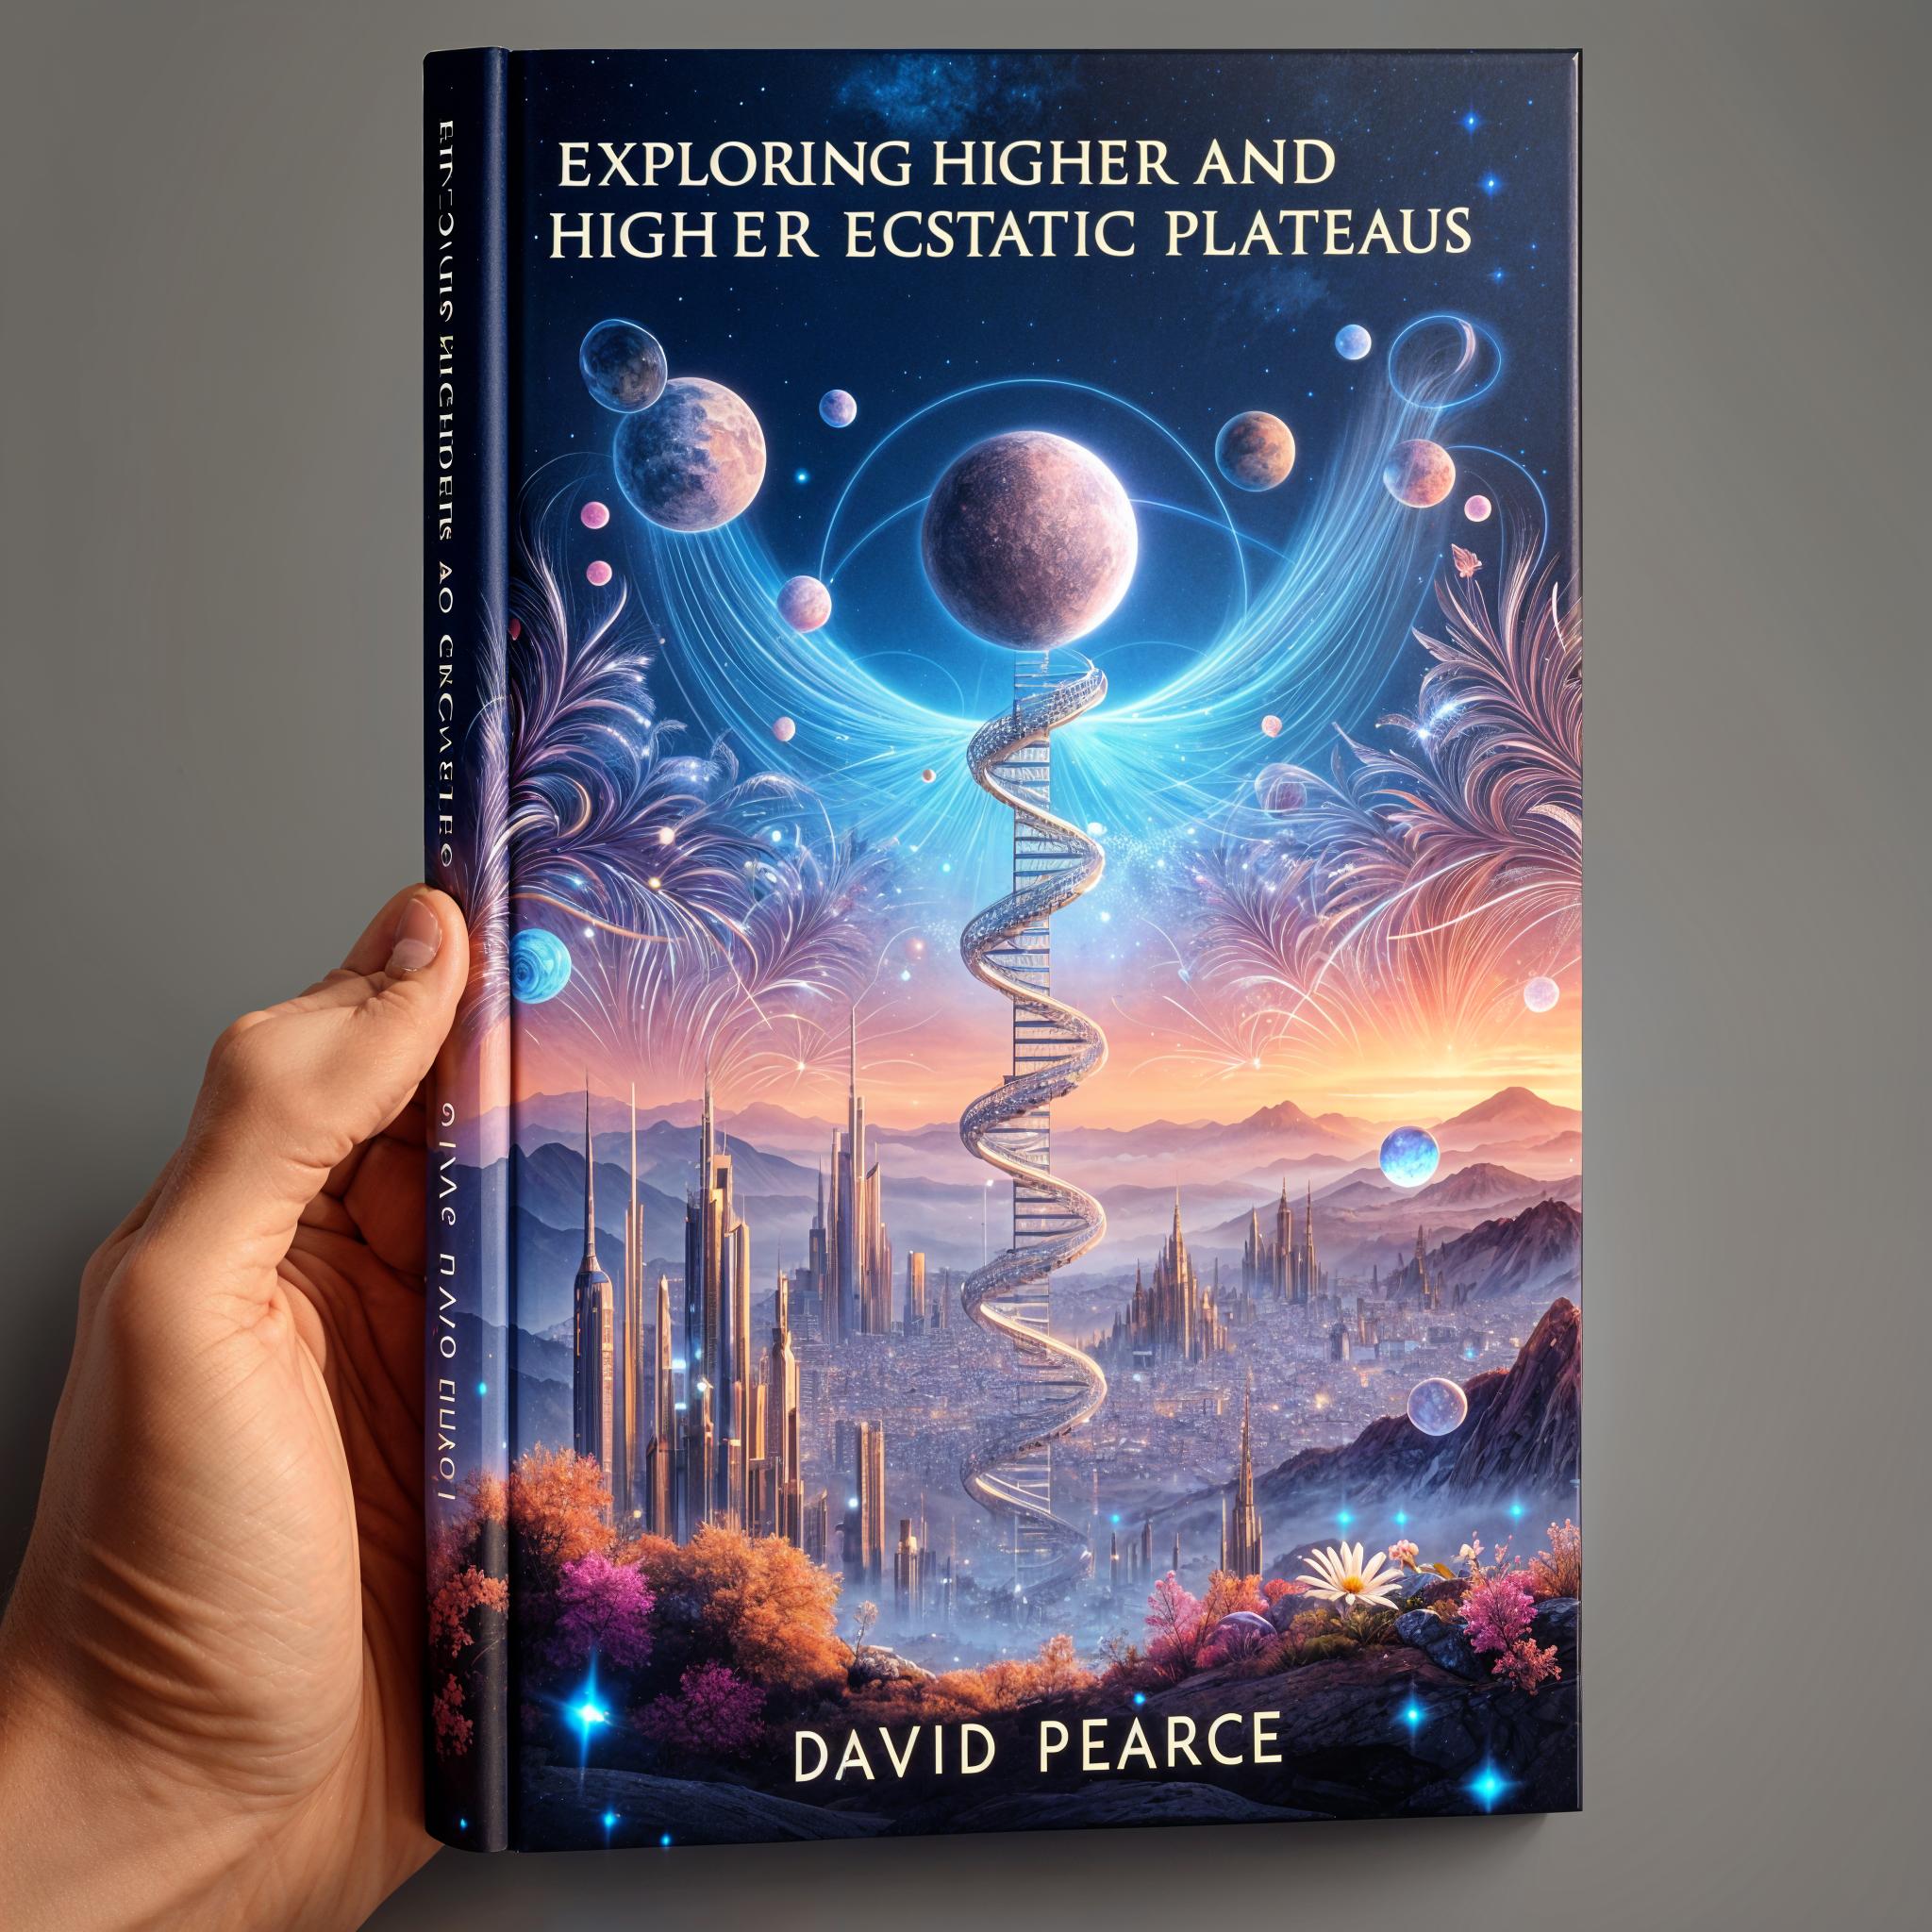 Exploring Higher and Higher Ecstatic Plateaus by David Pearce